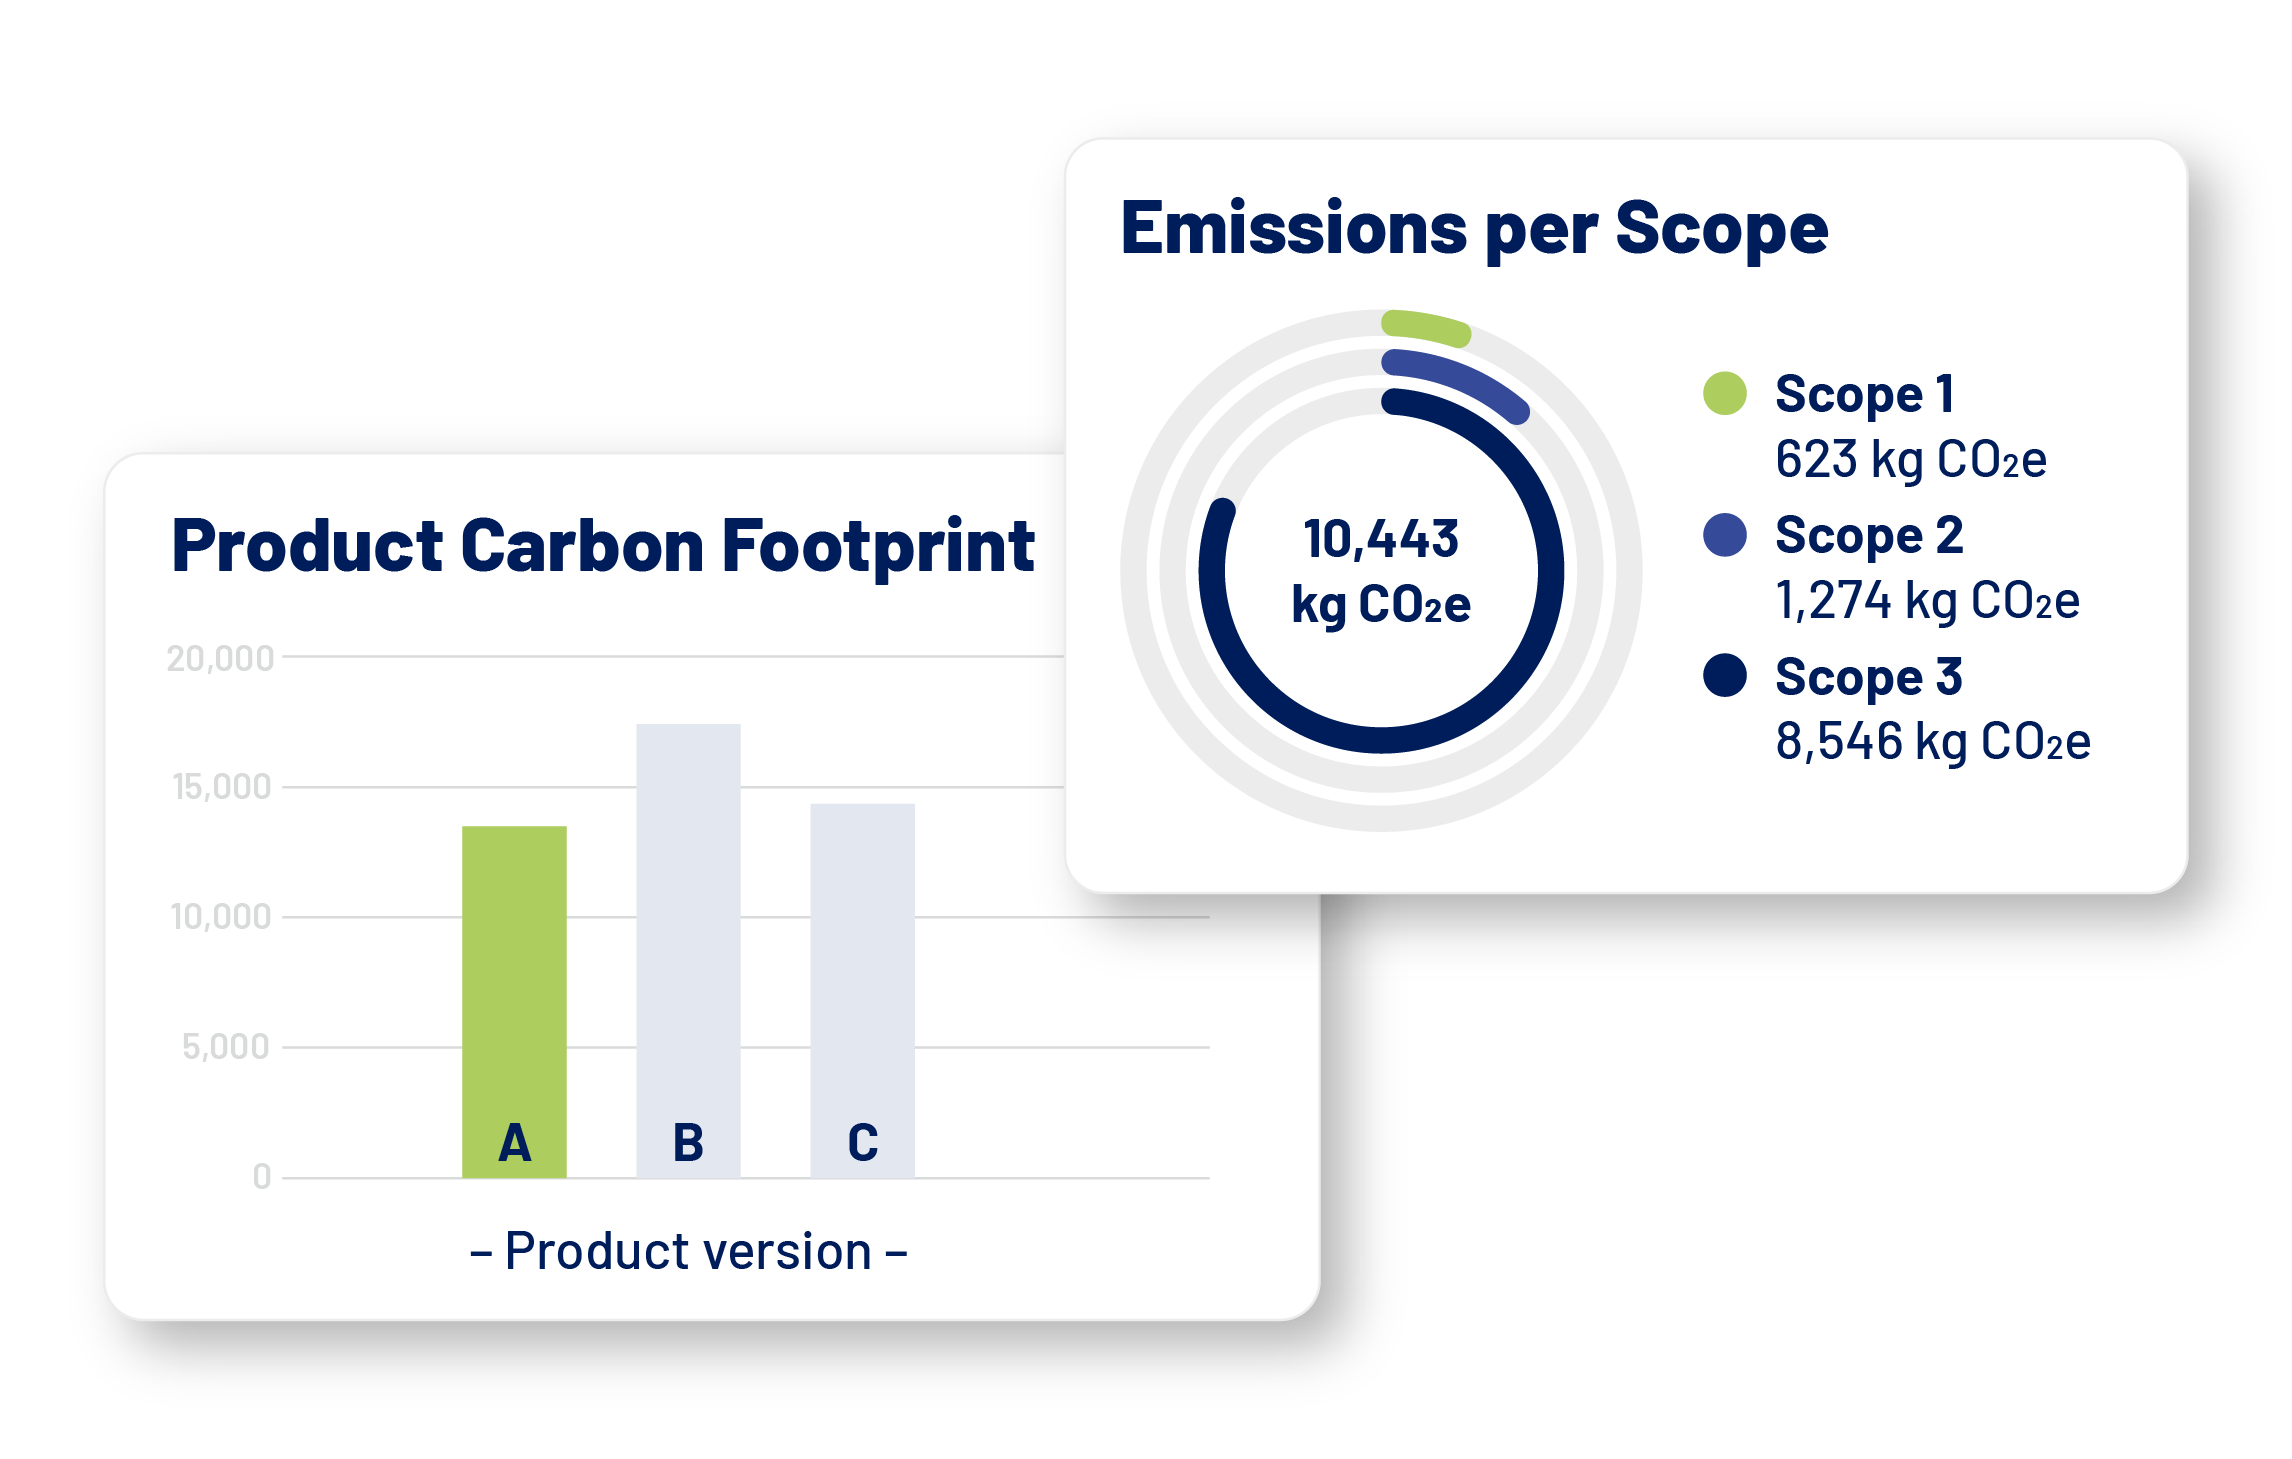 Infographic showing exemplary analysis of emissions of a product based on scope and product version